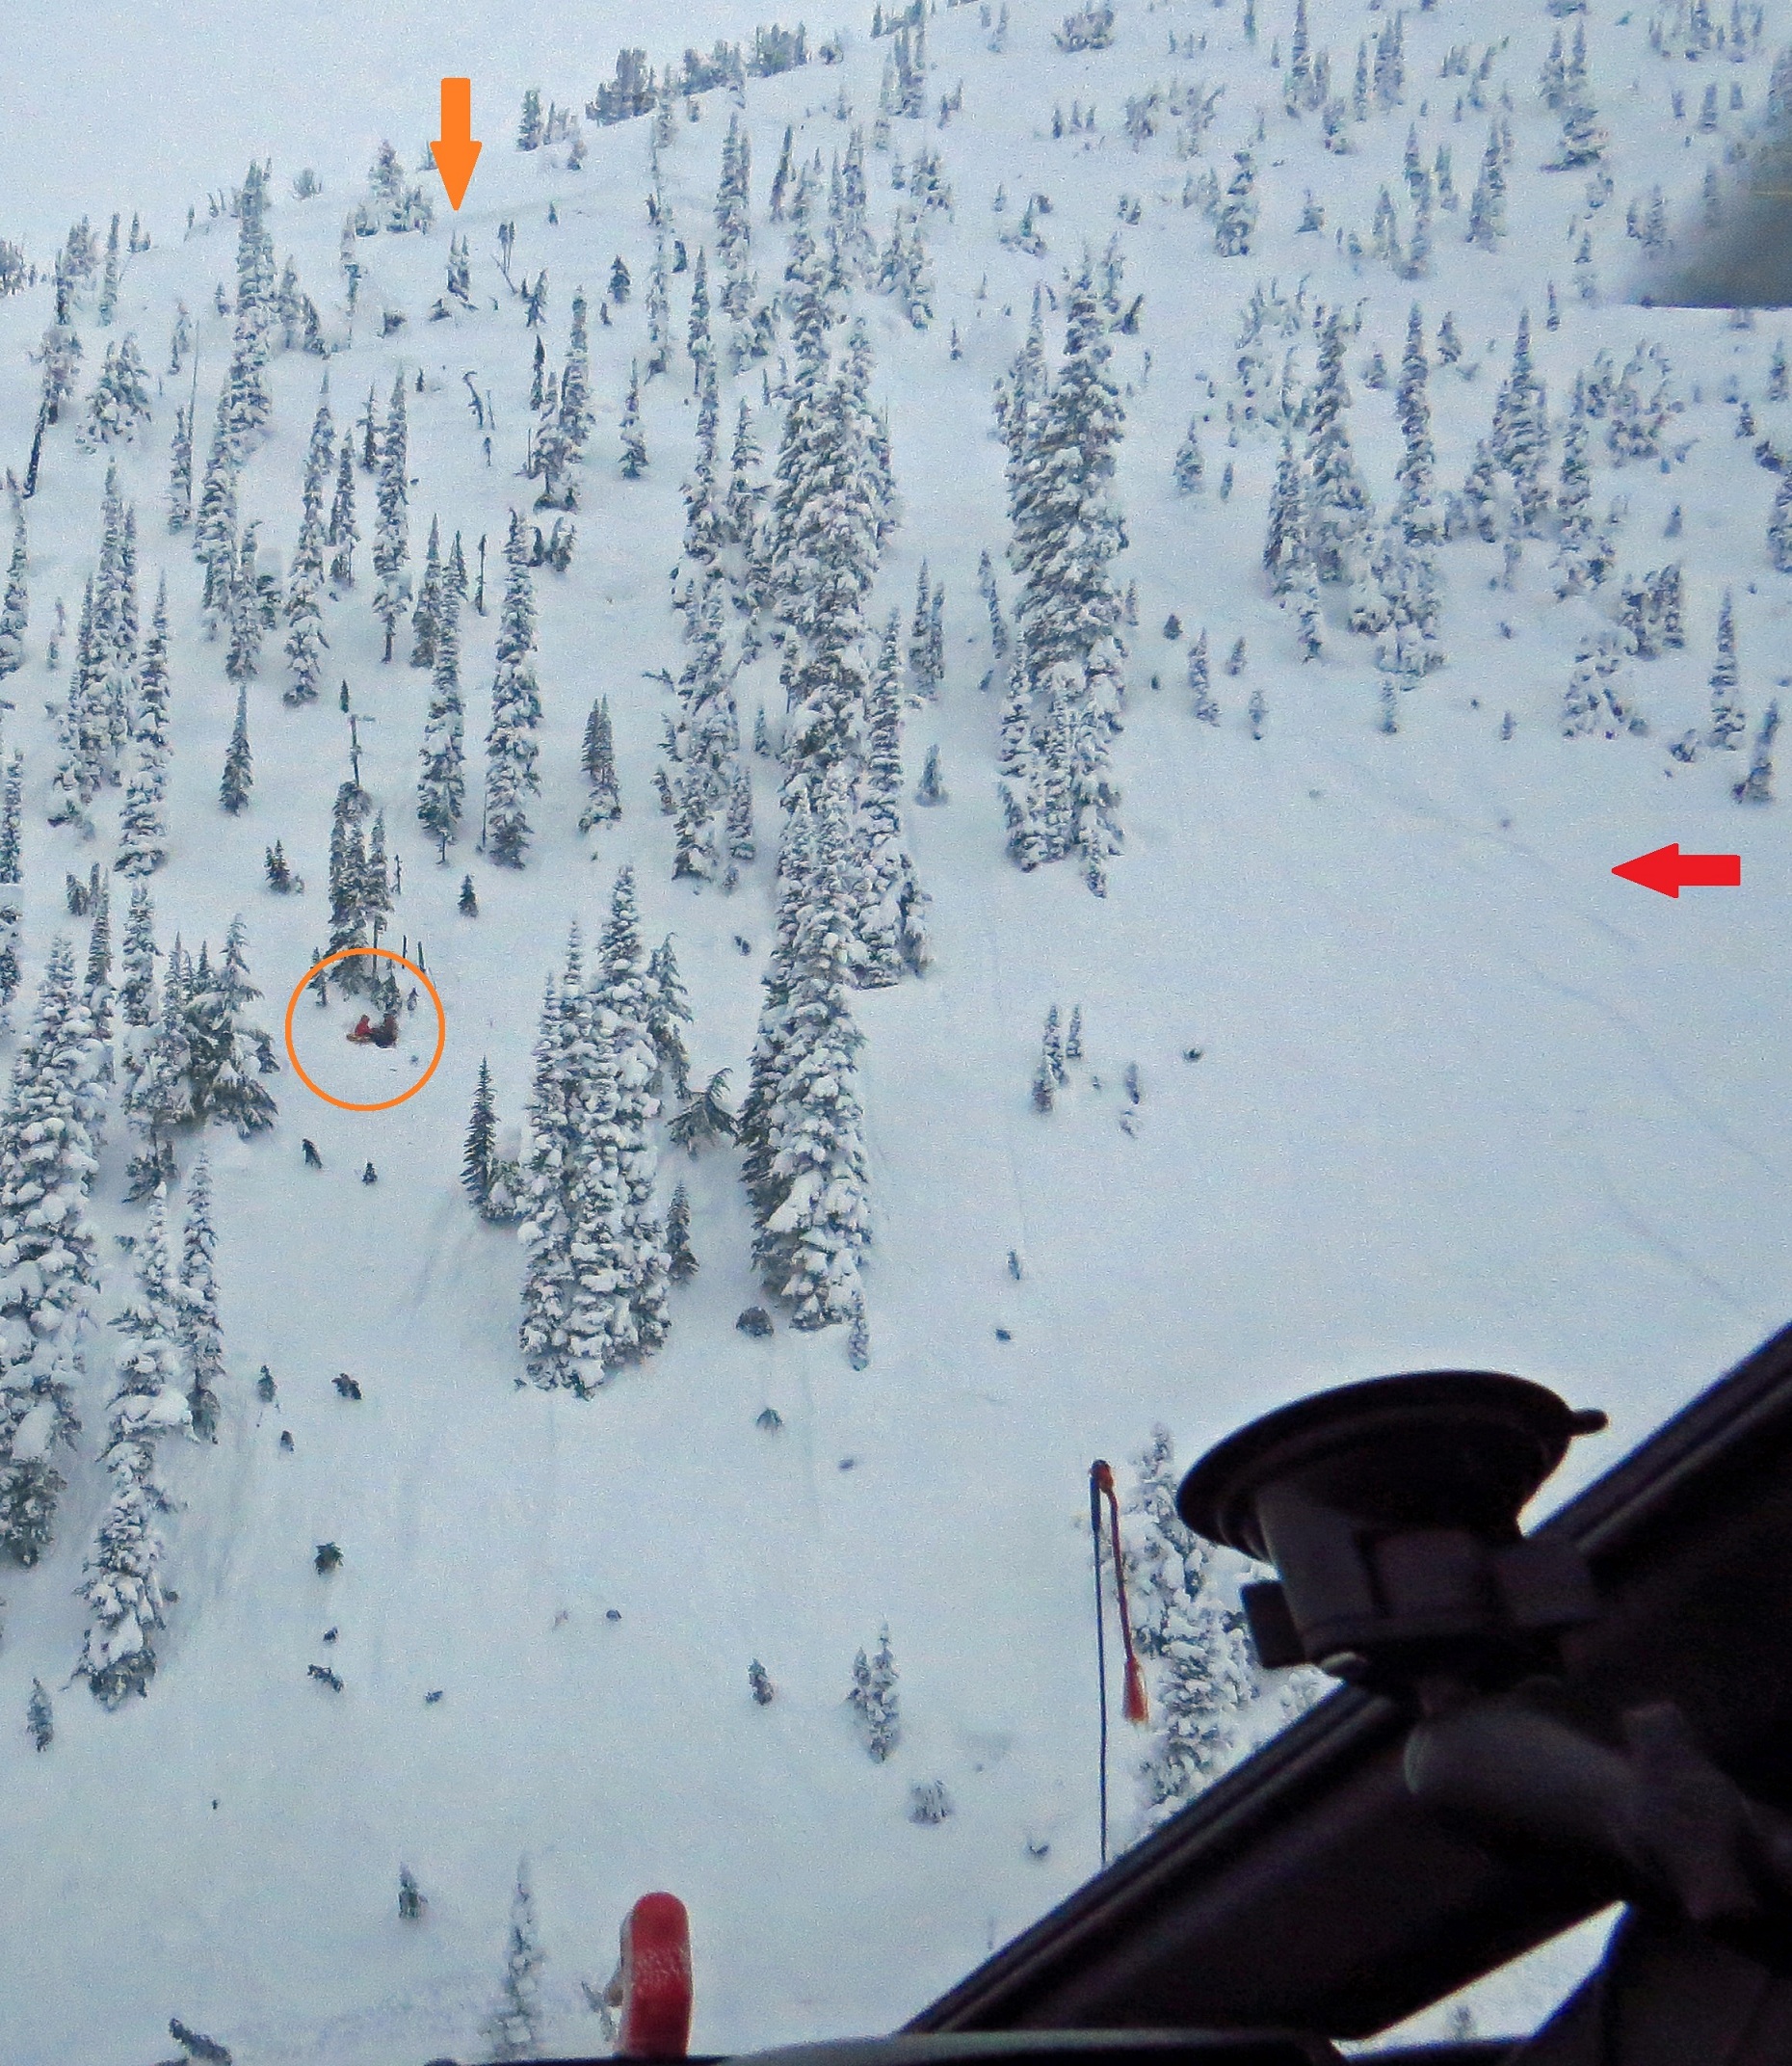 Photo of avalanche showing fracture line, ski tracks and skier location